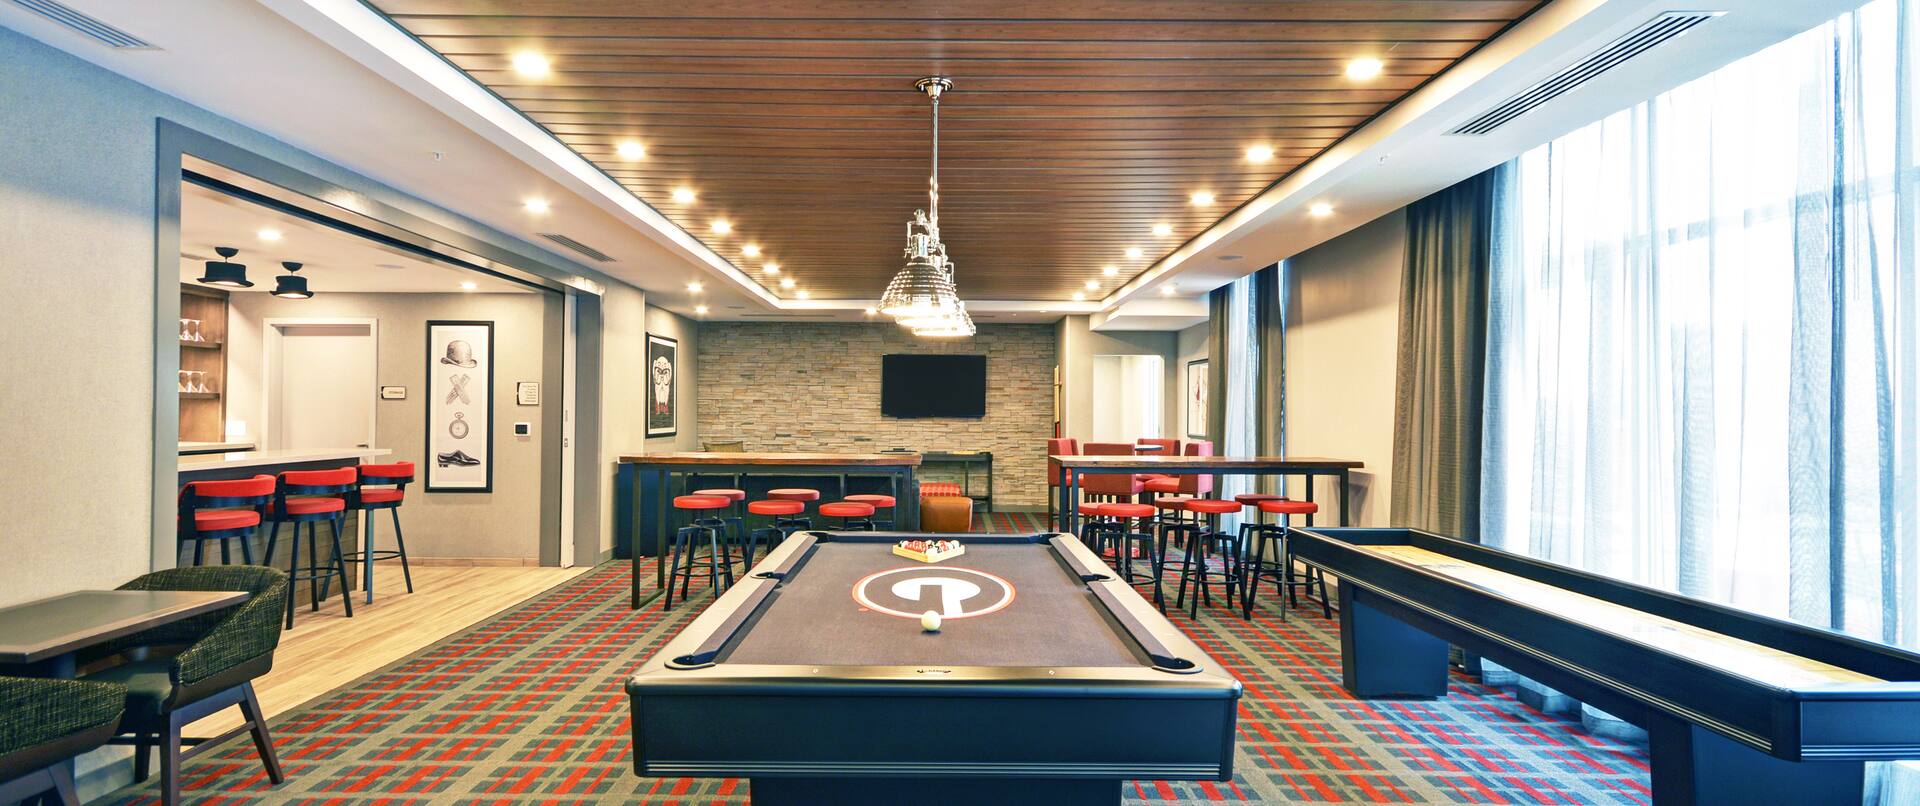 Lobby Games Area with Pool Table